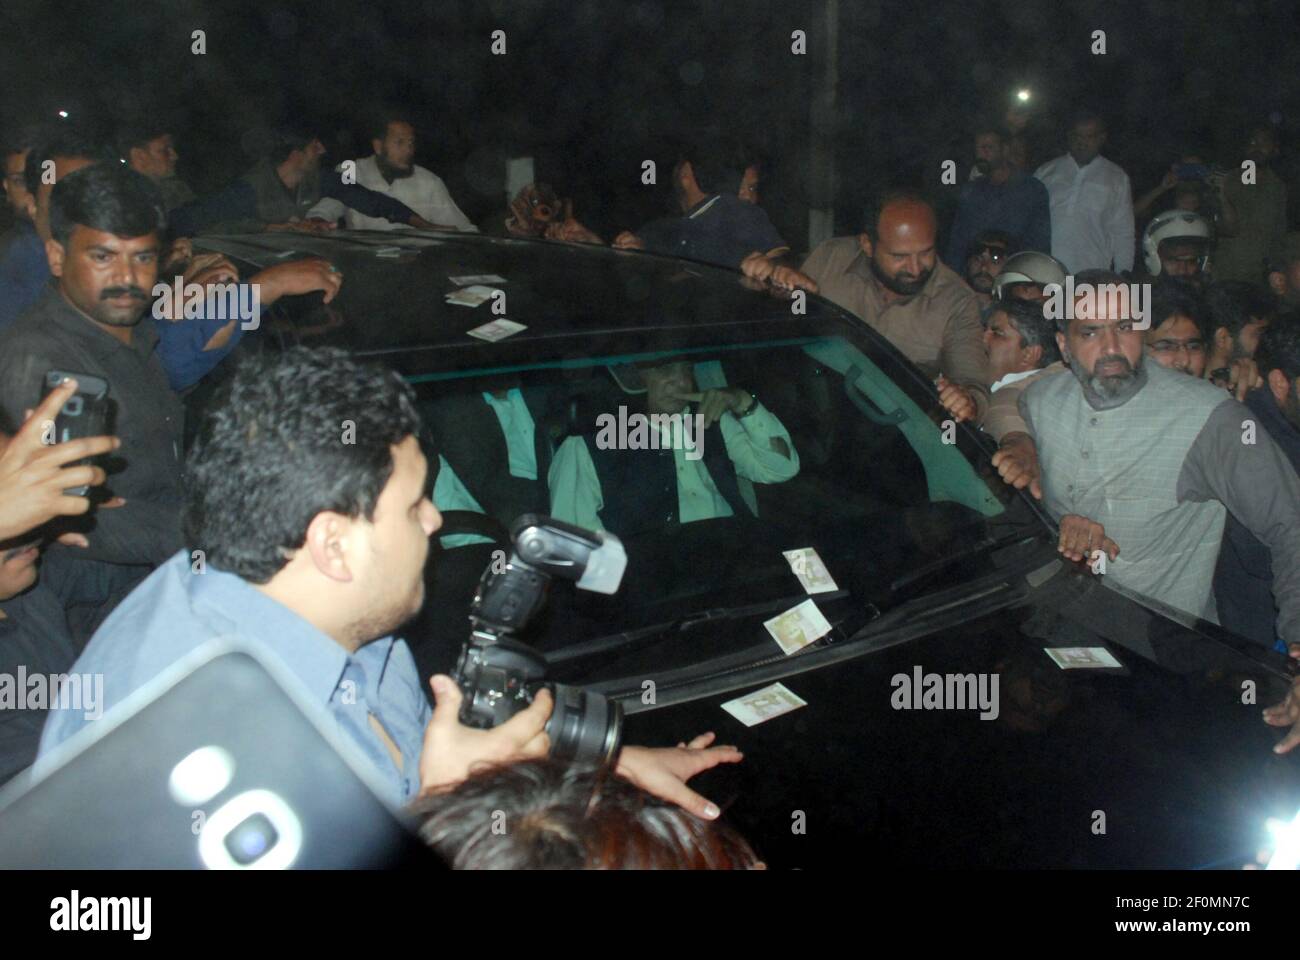 (1/10/2006) Pakistani former Prime minister Nawaz Sharif sit in a vehicle release from  Kot Lakpat jail after supreme court decision bail granted  for six weeks,  in Lahore. Pakistan's top Supreme Court on March 26 granted former premier Nawaz Sharif bail for six weeks, suspending his sentence and giving him the freedom to obtain medical treatment at a domestic hospital within the country” The court said Sharif who has heart-related issues. (Photo by Rana Sajid Hussain/Pacific Press/Sipa USA) Stock Photo